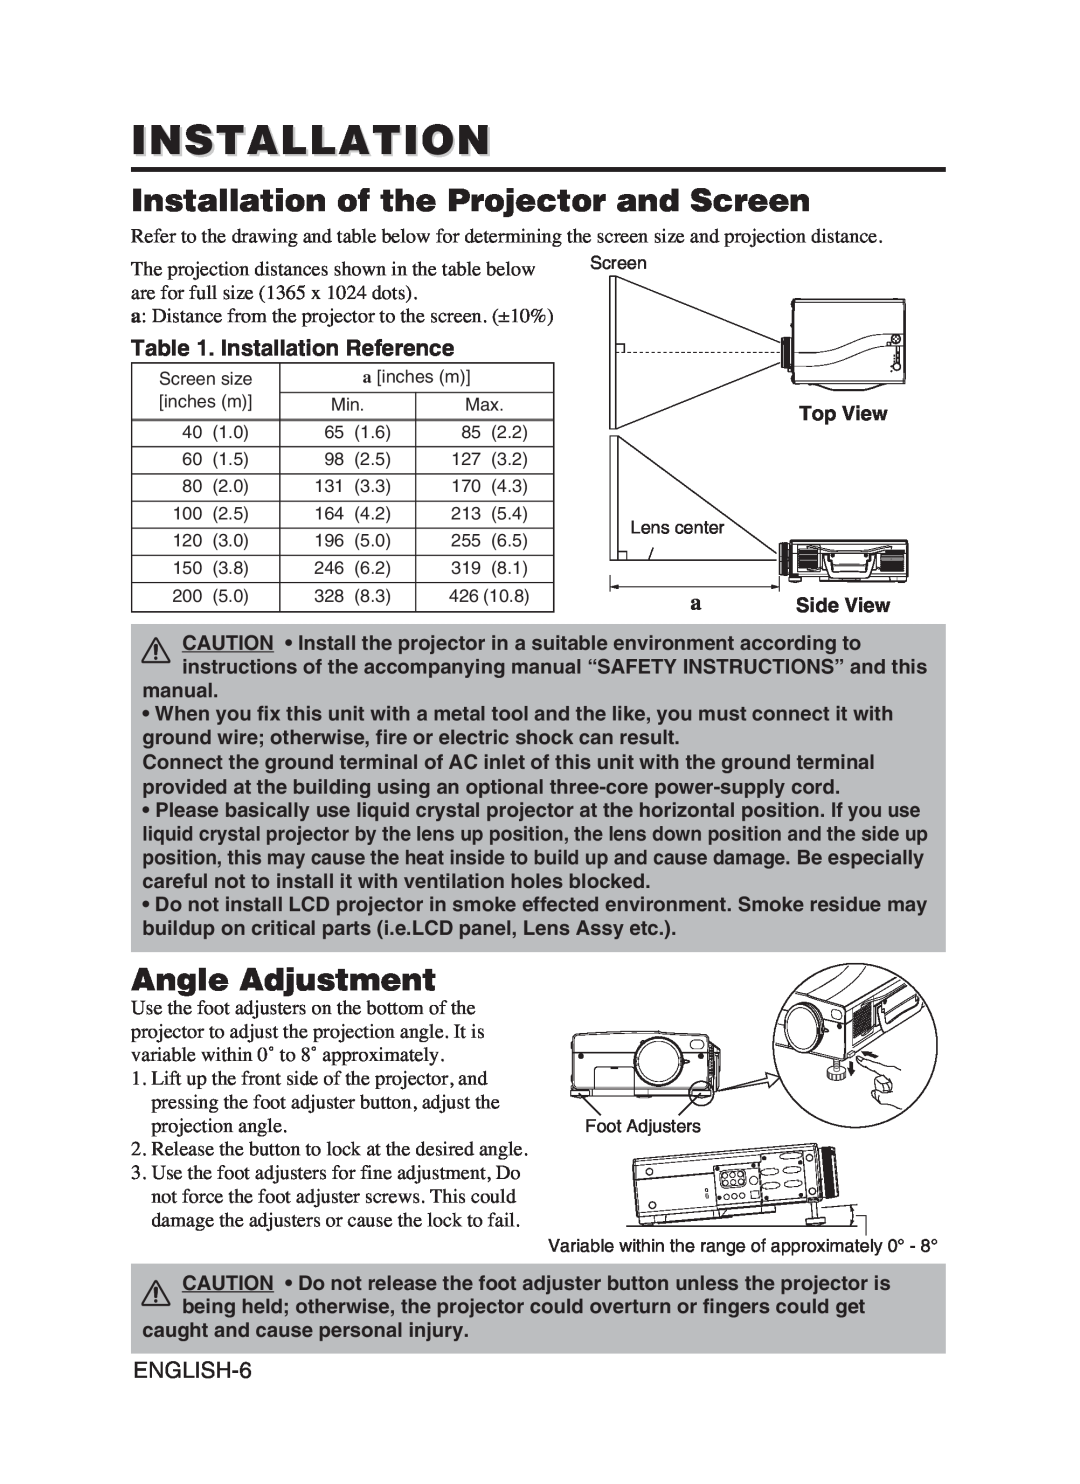 Hitachi CP-SX5600W user manual Installation of the Projector and Screen, Angle Adjustment, Installation Reference 